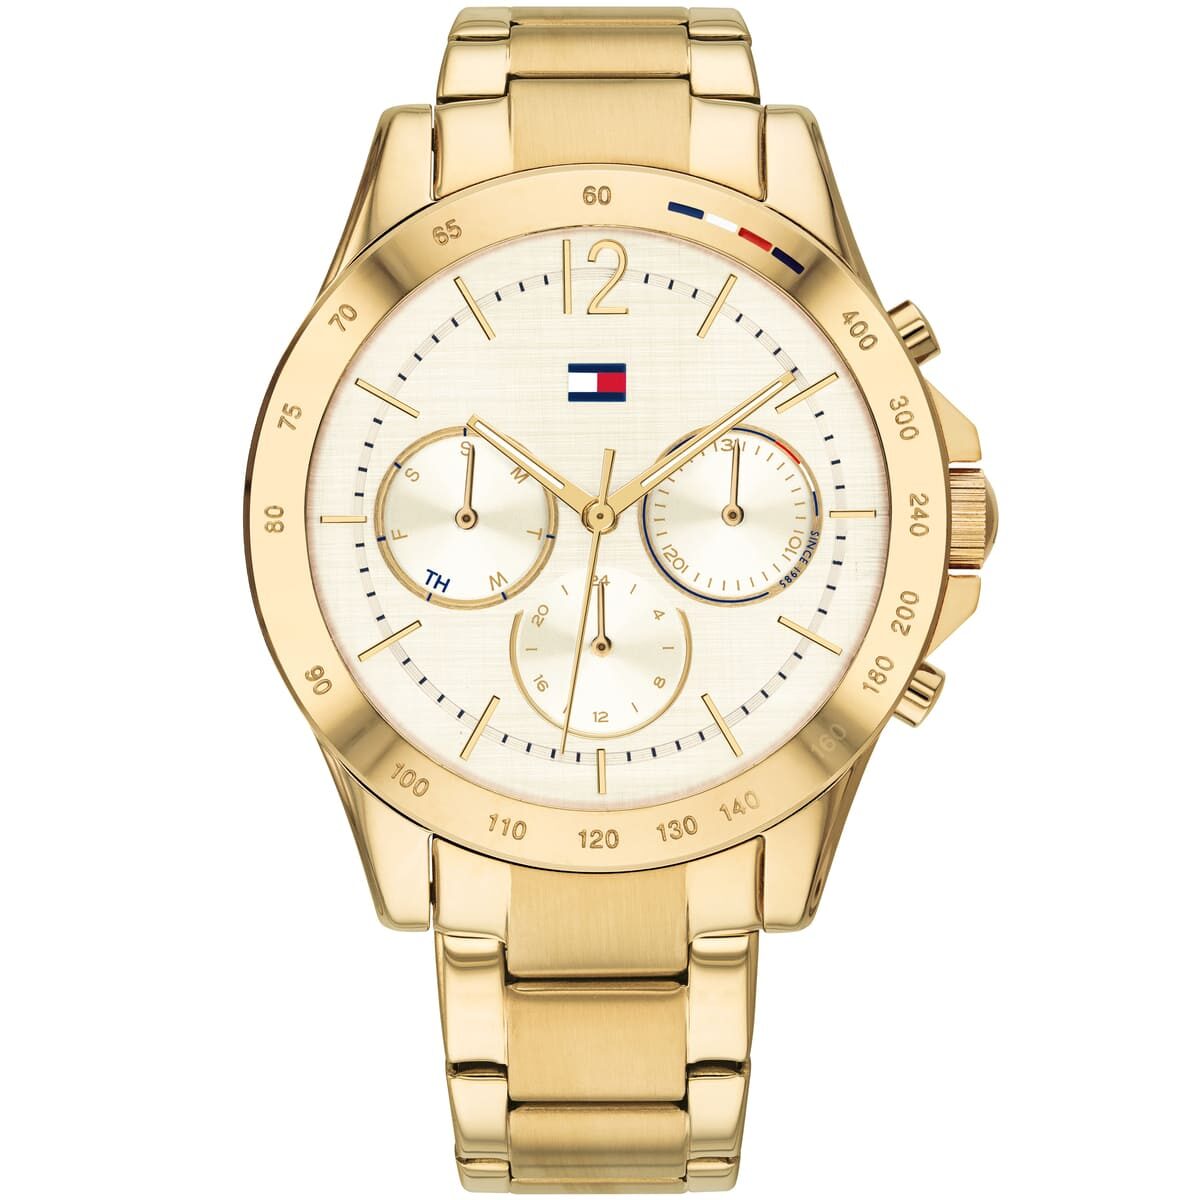 1782195-tommy-hilfiger-watch-women-gold-dial-stainless-steel-metal-golden-strap-quartz-analog-day-date-month-haven